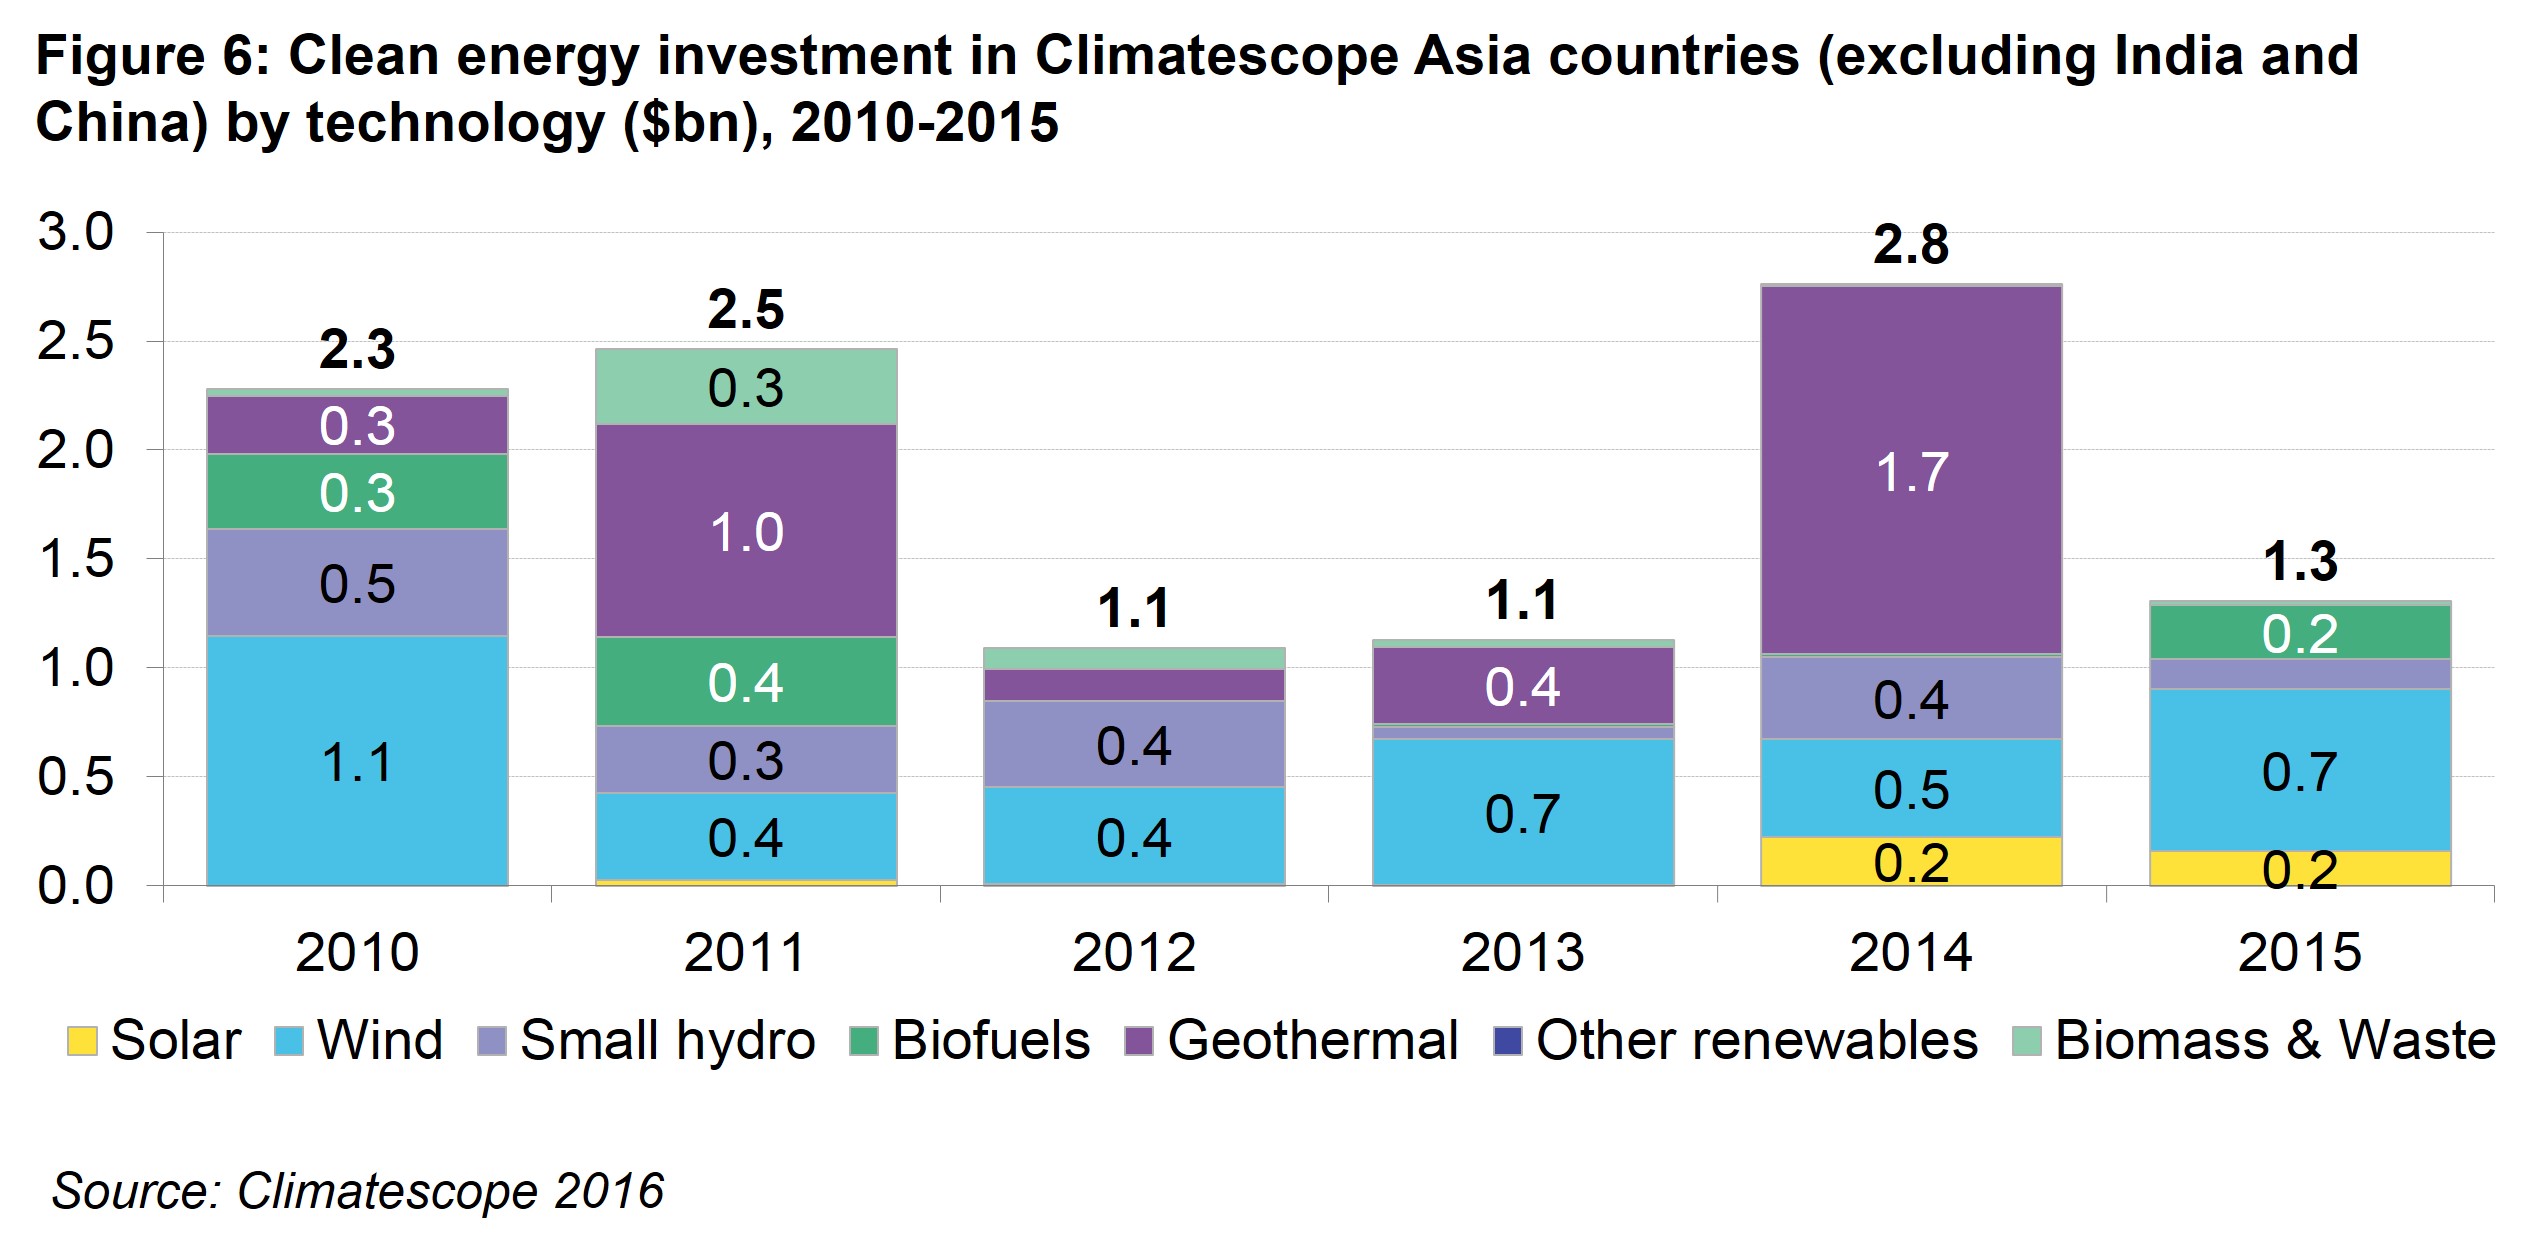 Asia Fig 6 - Clean energy investment in Climatescope Asia countries (excluding India and China) by technology ($bn), 2010-2015